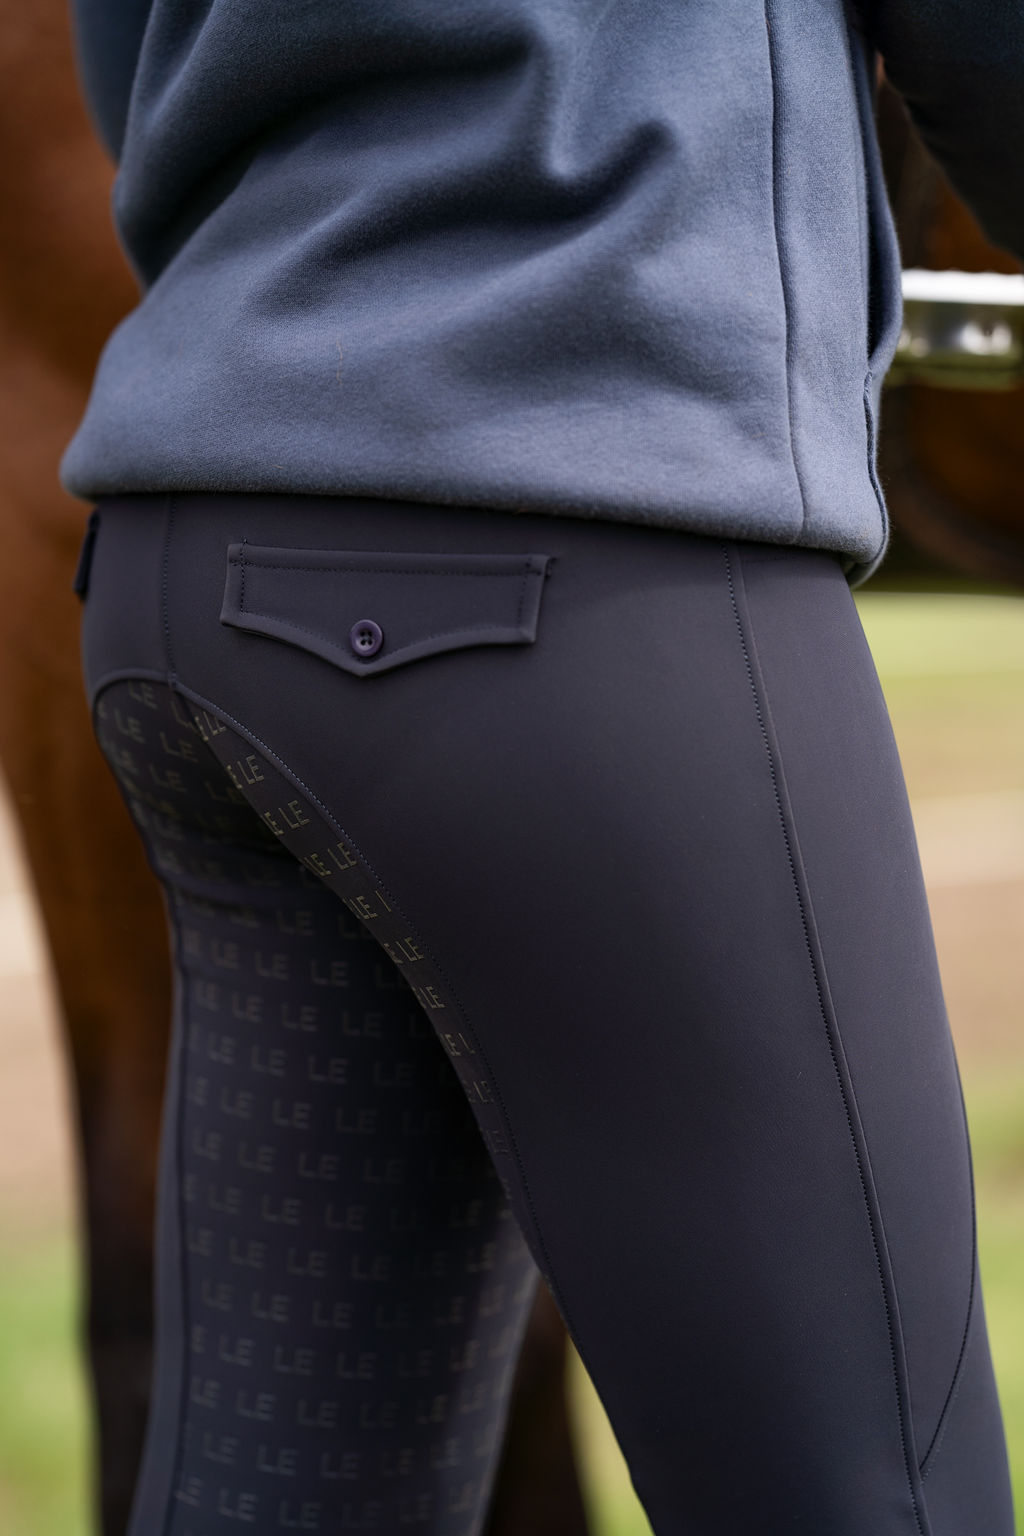 LE Everyday Pull On Breeches Full Seat